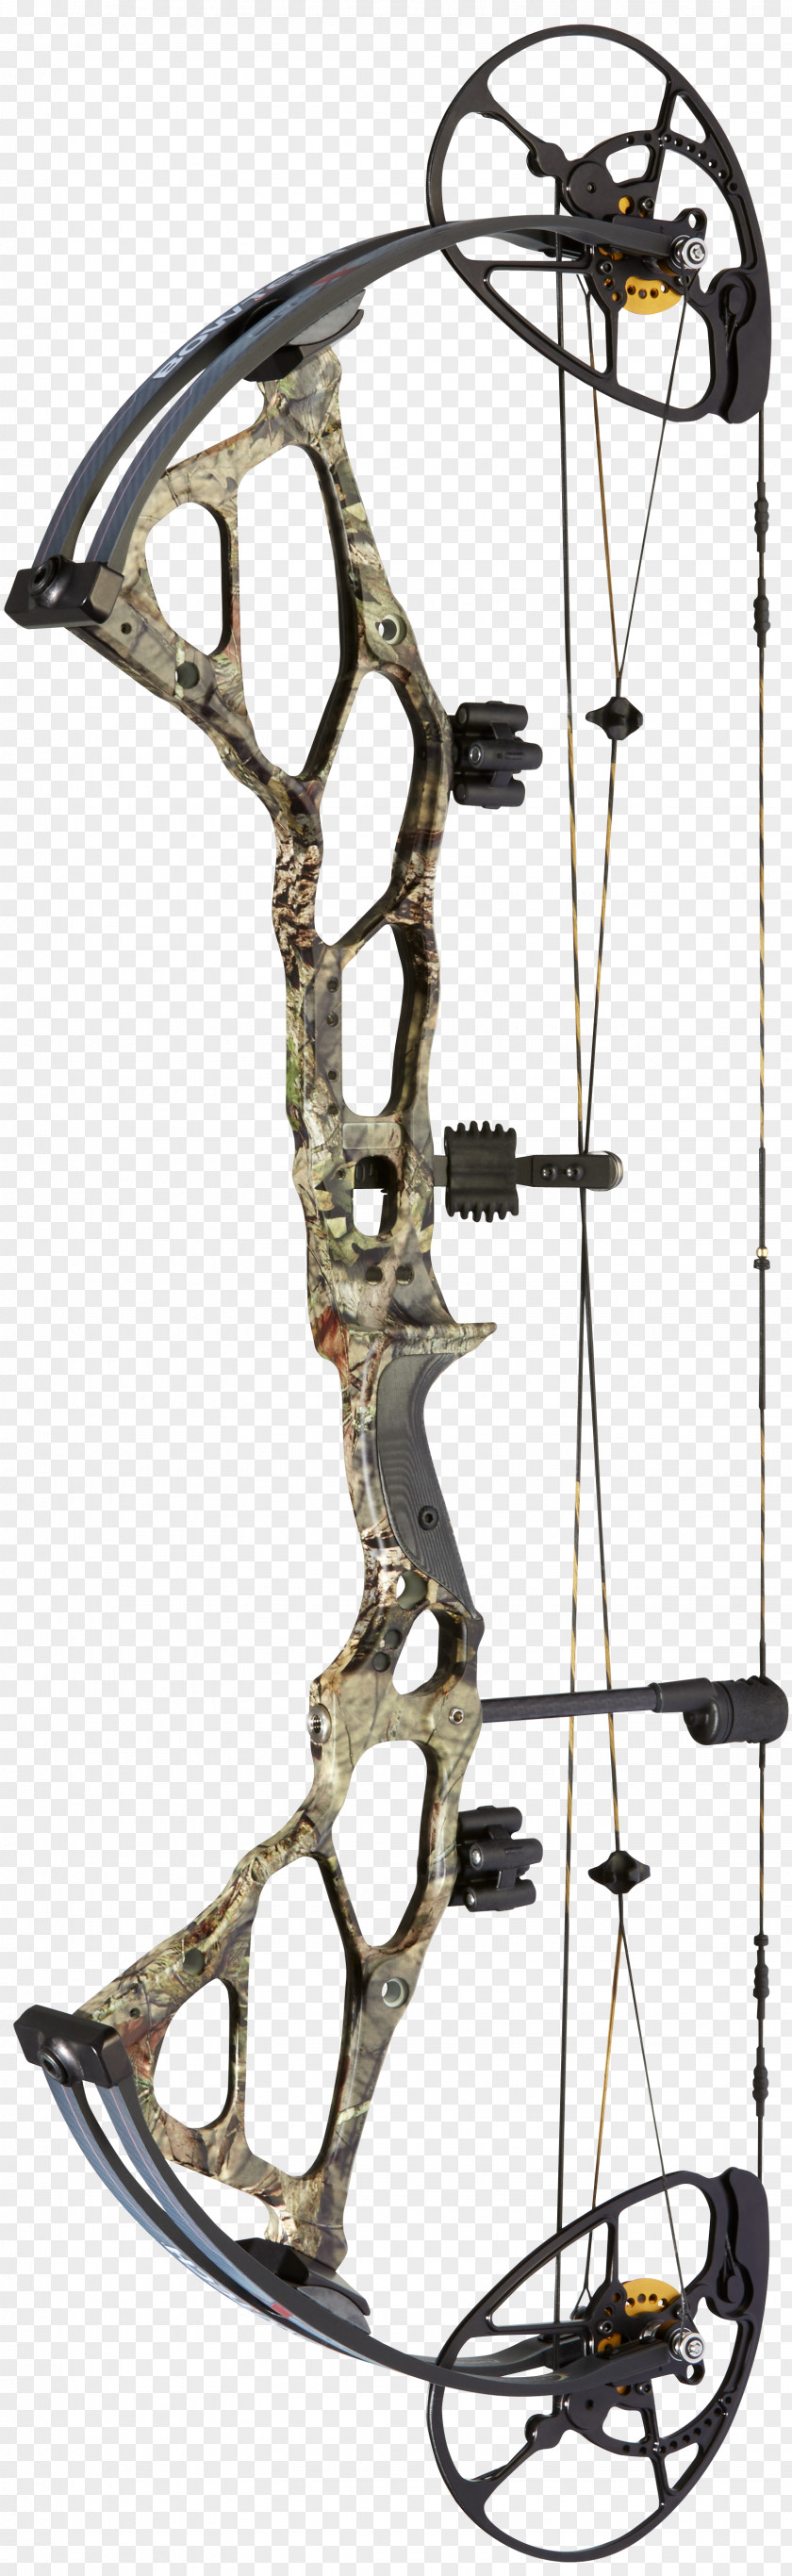 Archery Compound Bows Bow And Arrow Binary Cam BowTech PNG